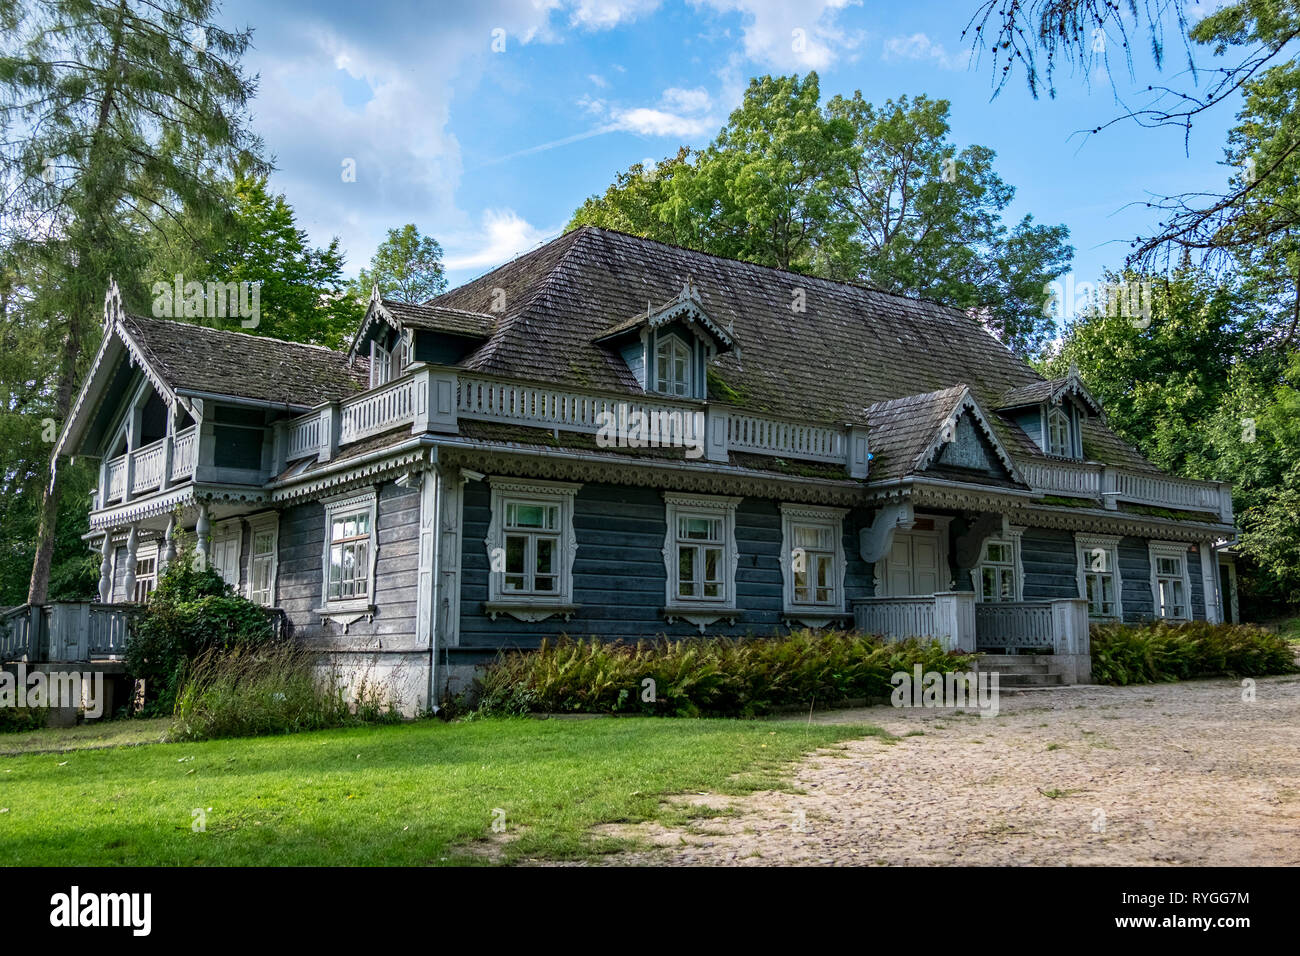 Royal hunting lodge for former Russian nobility in early 1900's found at Bialowieza National Park in eastern Poland near the Belorussian border Stock Photo